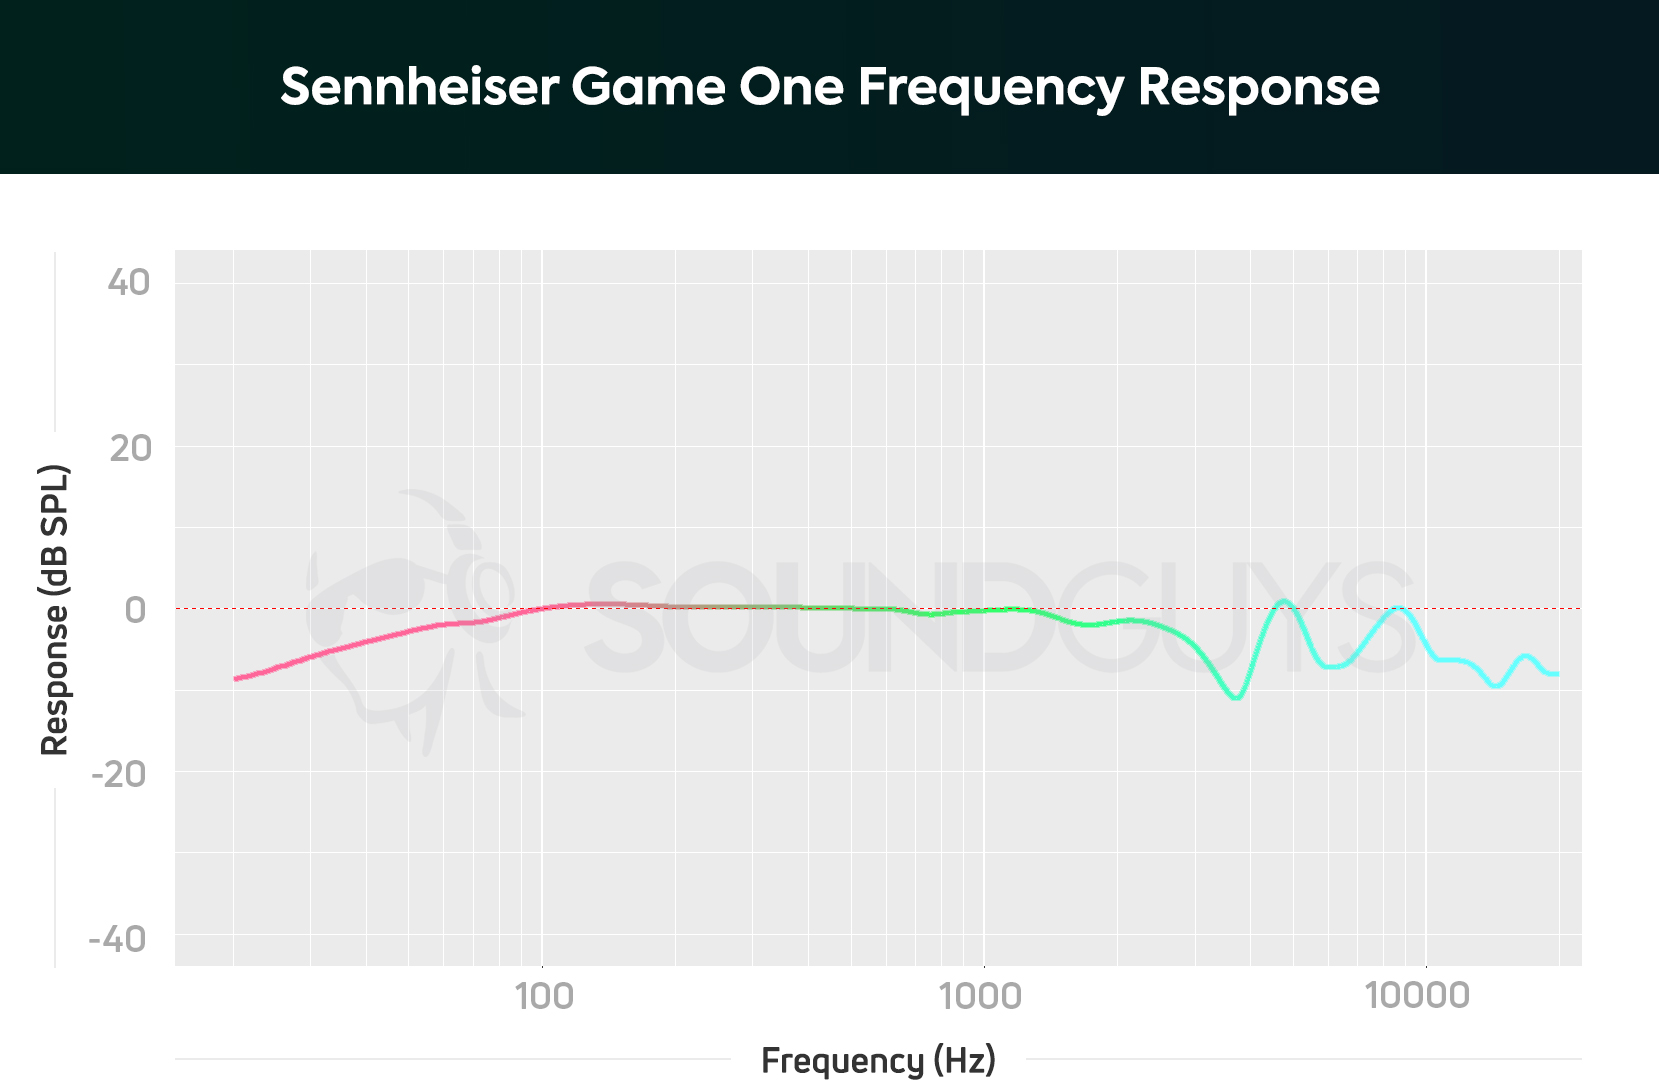 A chart showing the frequency response of the Sennheiser Game One gaming headset.